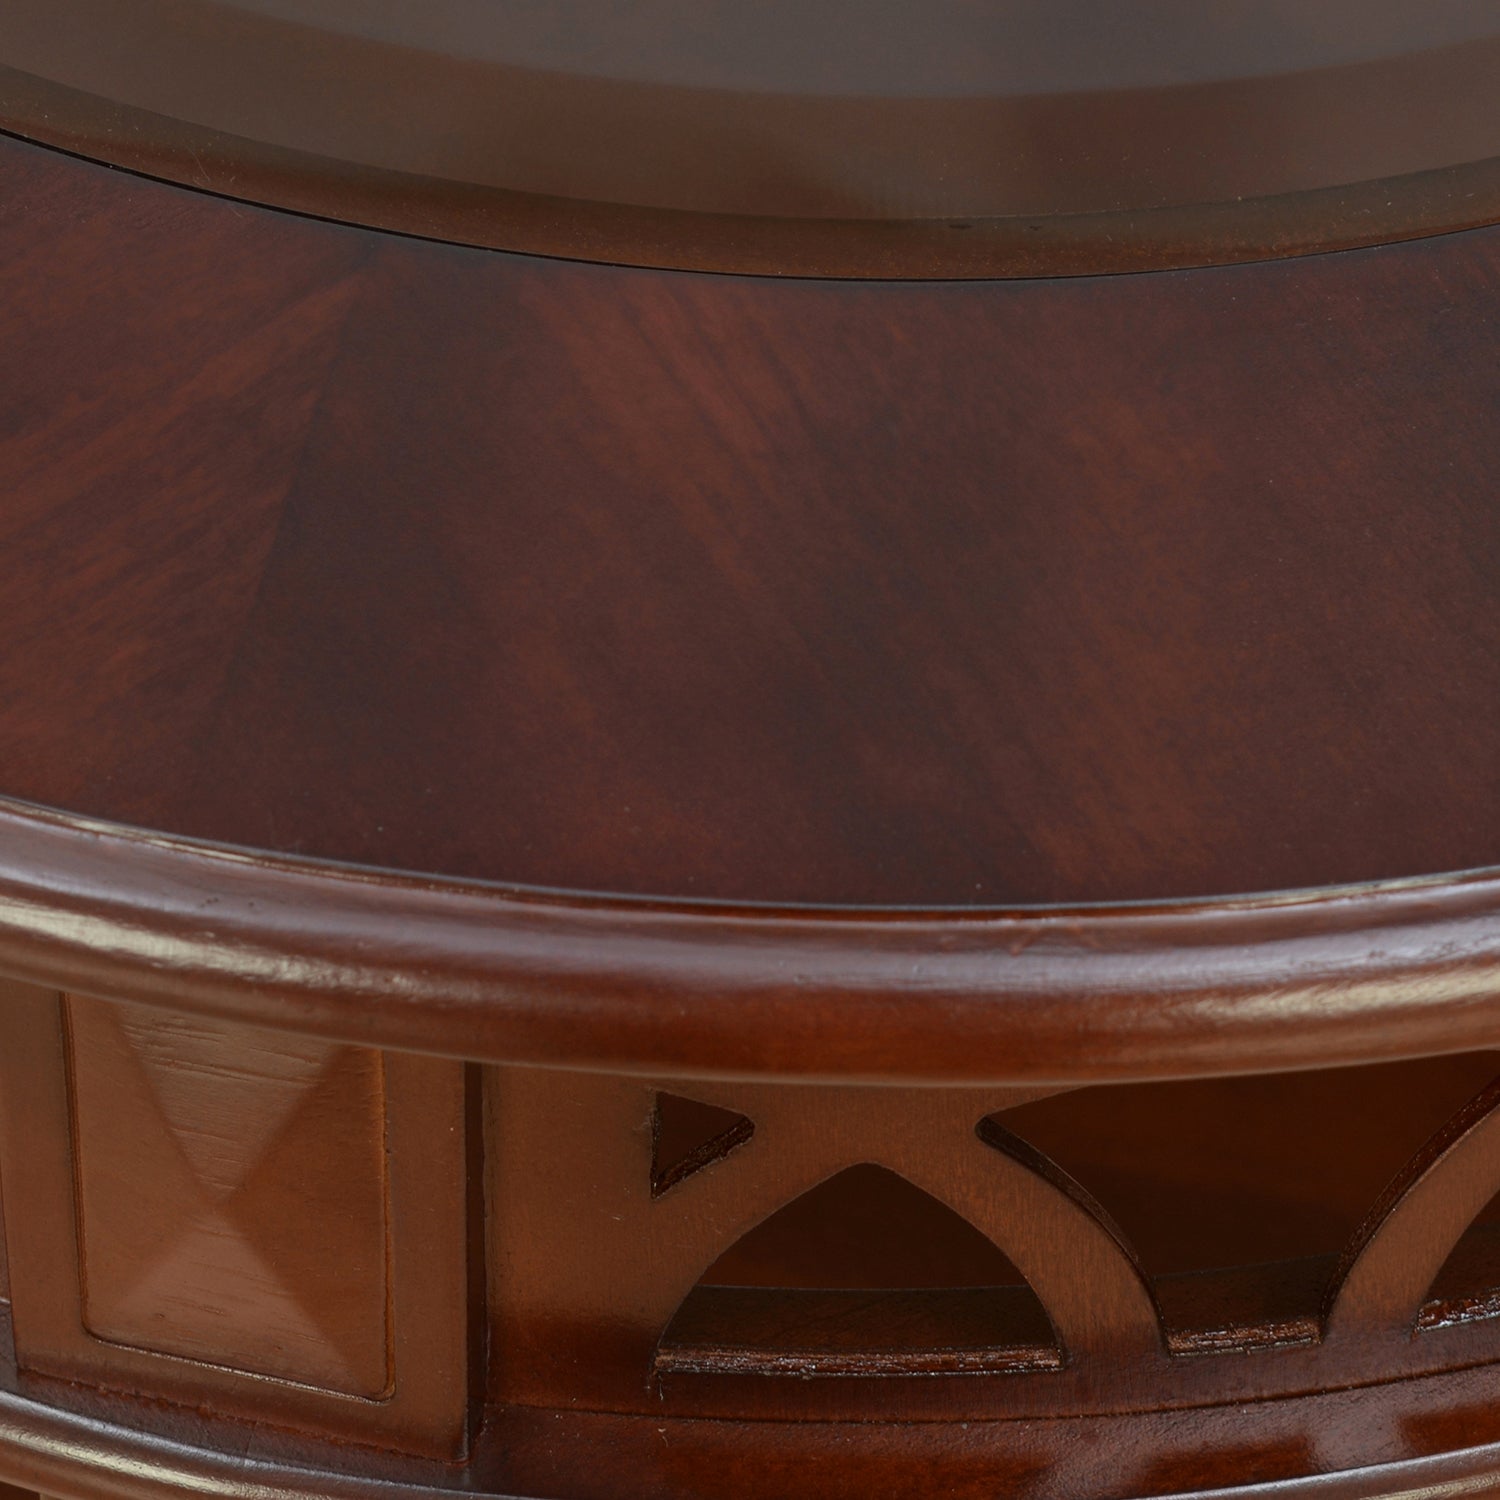 Pisces Side Table (Brown)